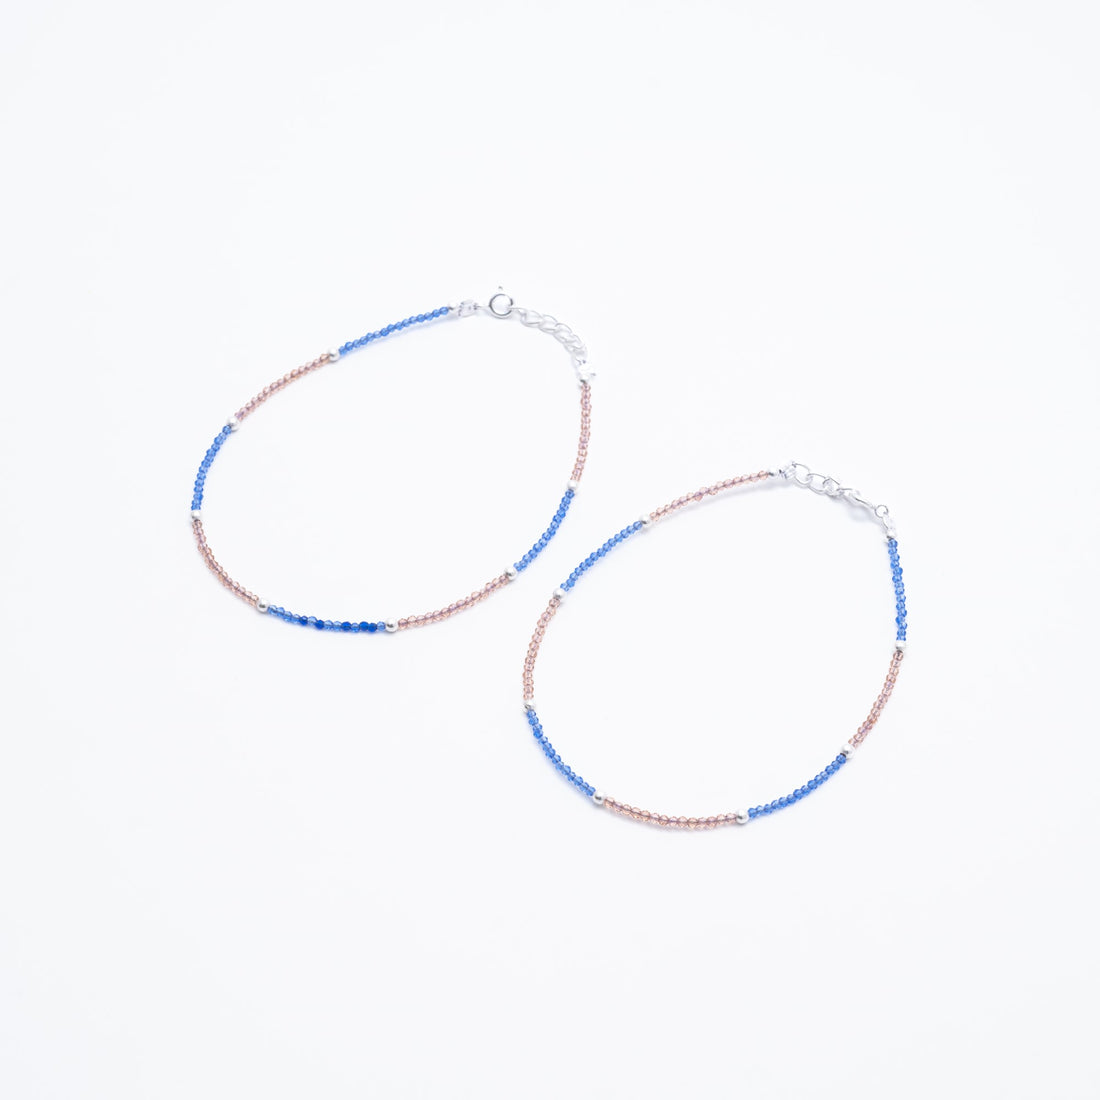 Pink and Dark Blue Beads Silver Anklets for Women